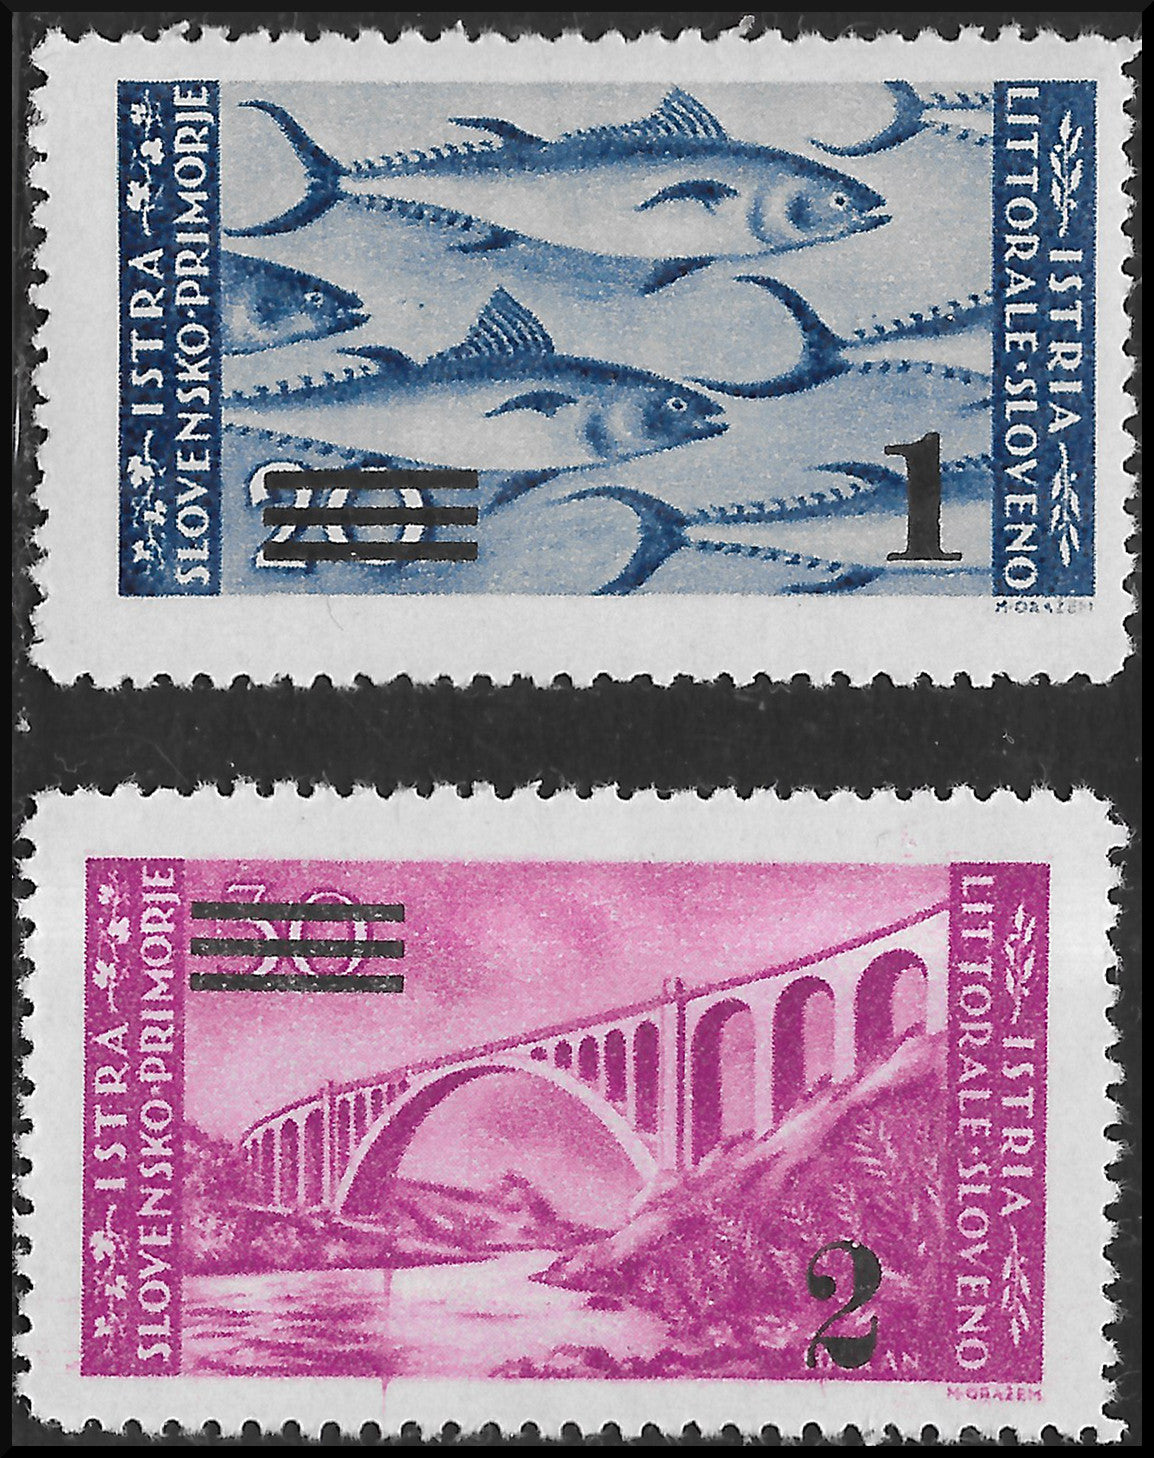 Bilingual issue, fish from the previous issue overprinted, cpl series. of 2 new copies (61, 62)